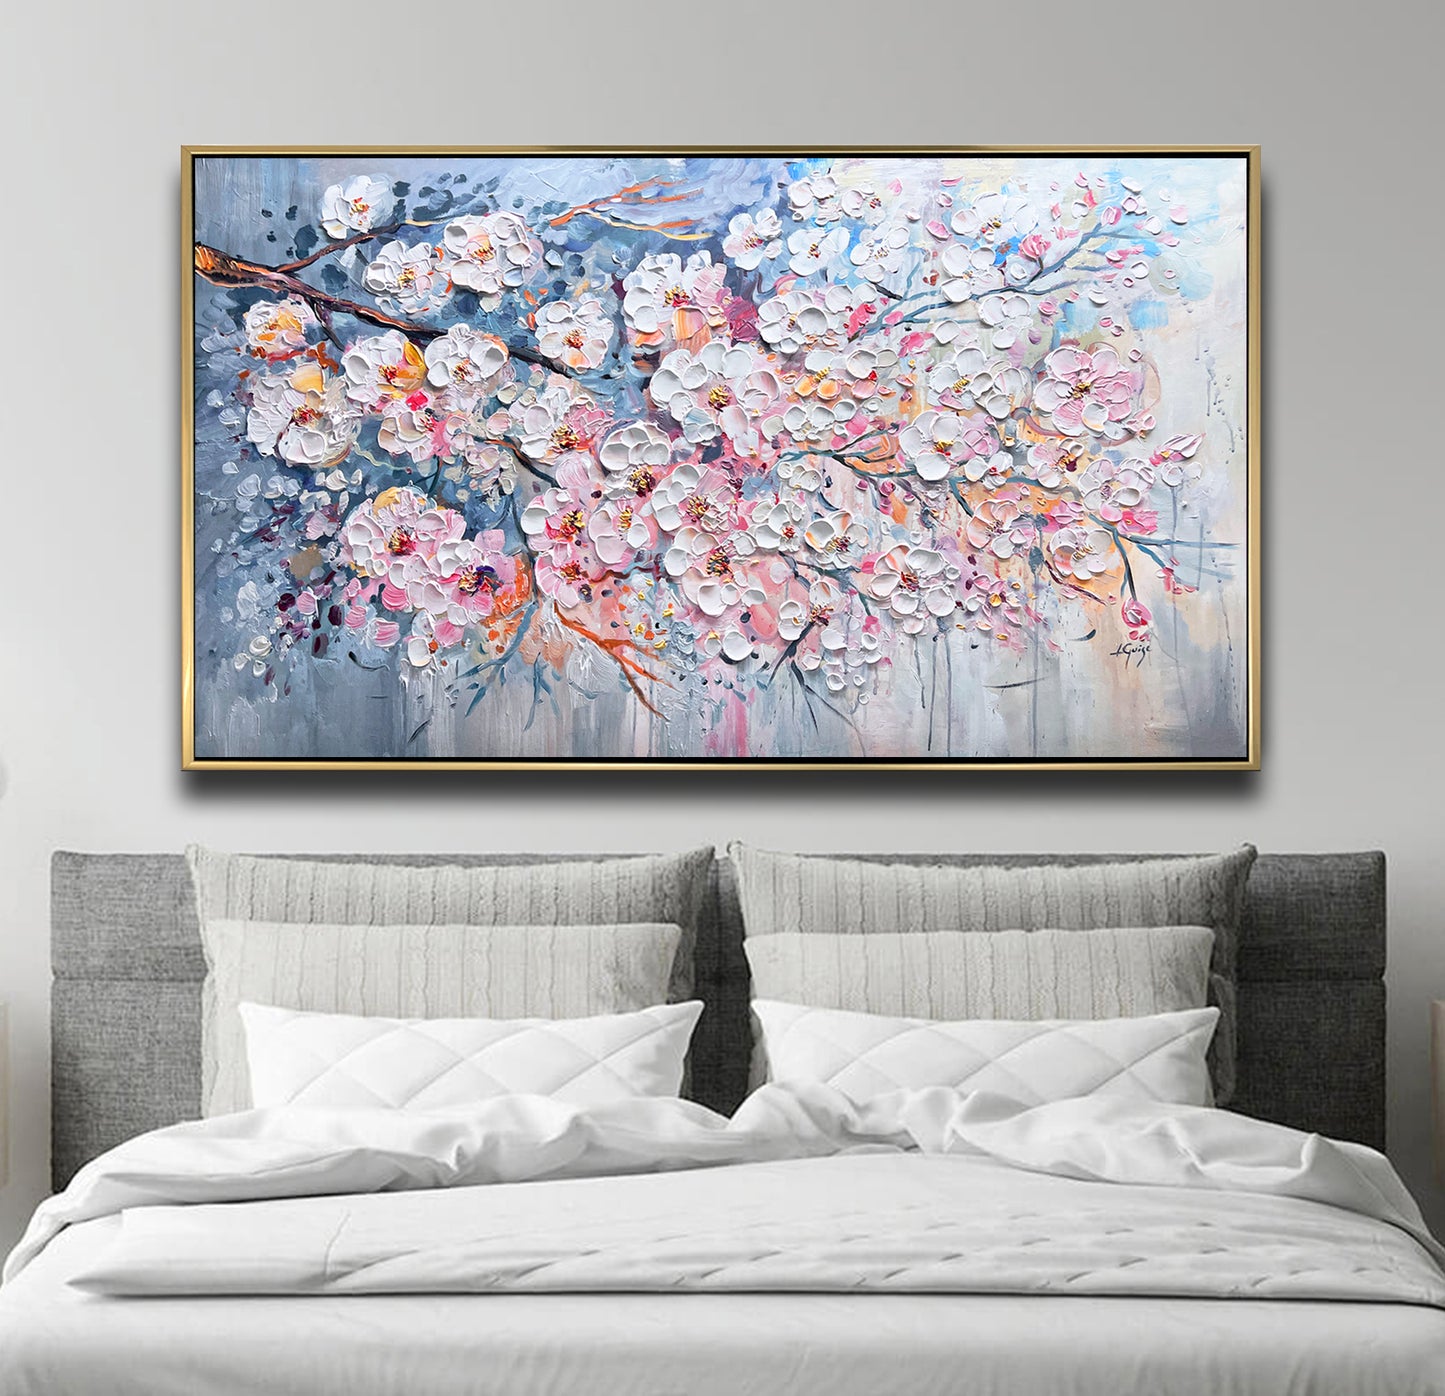 a large painting on a wall above a bed